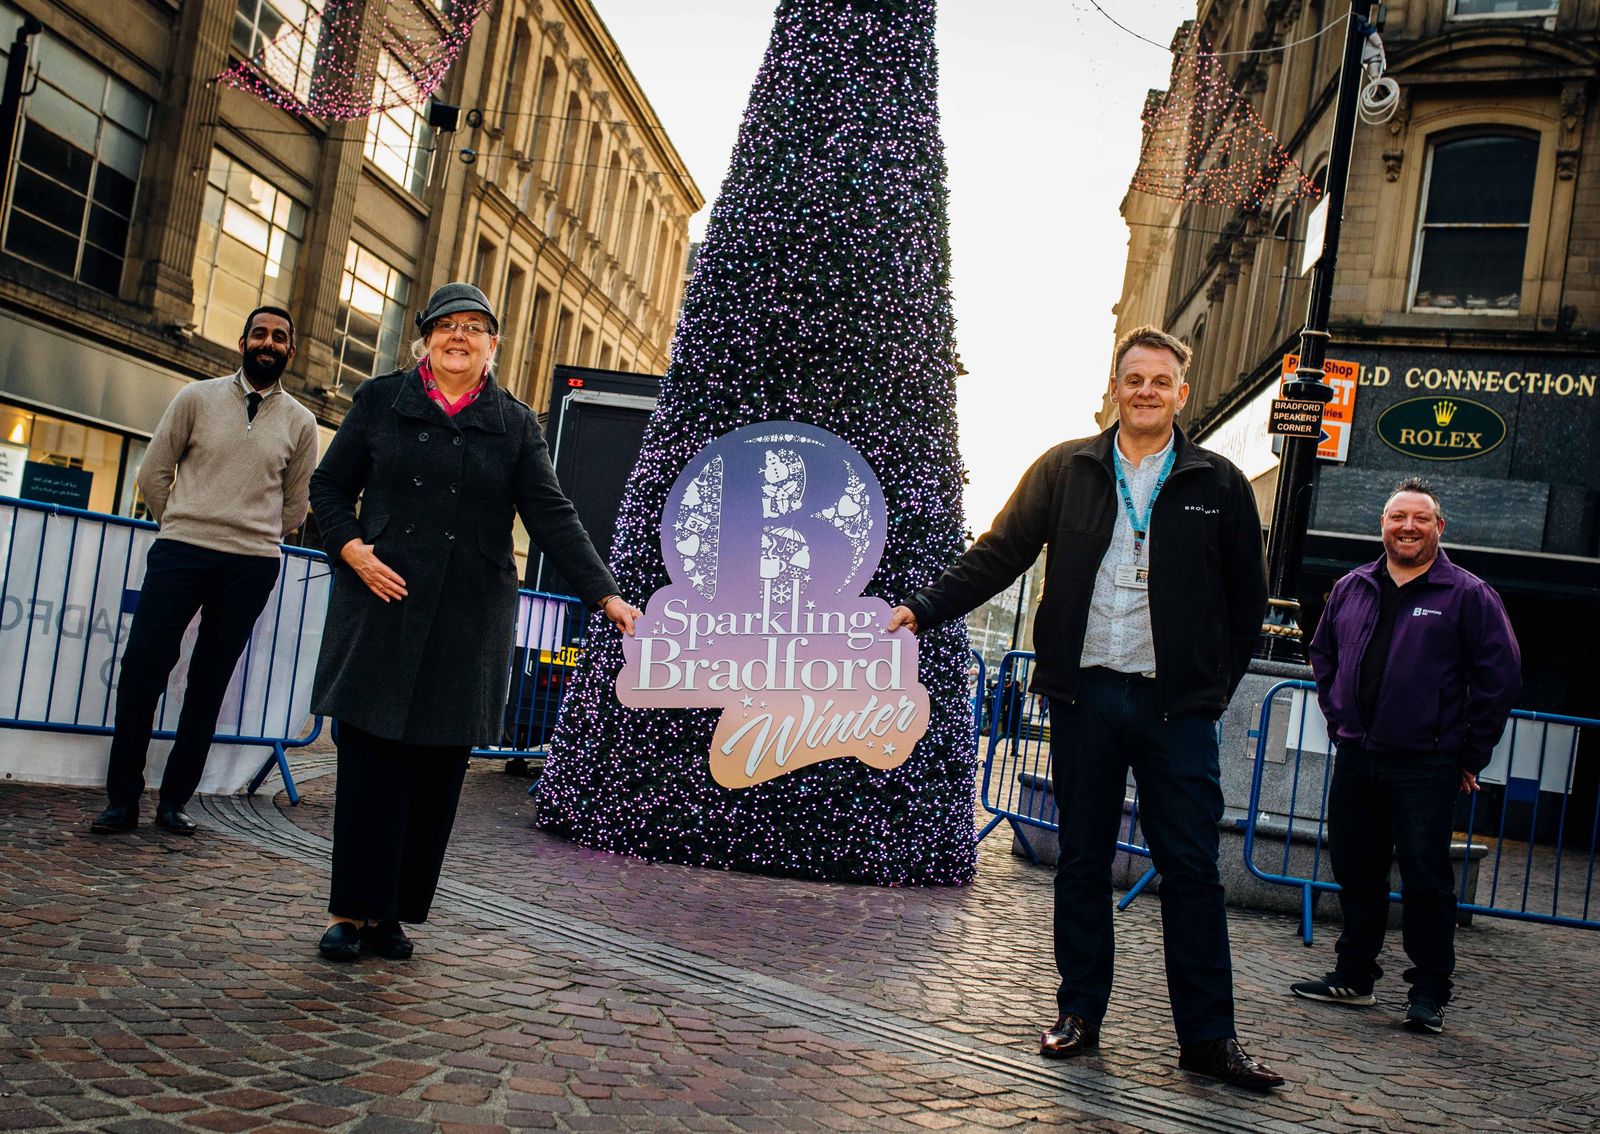 Bradford's ready to sparkle and shine this winter